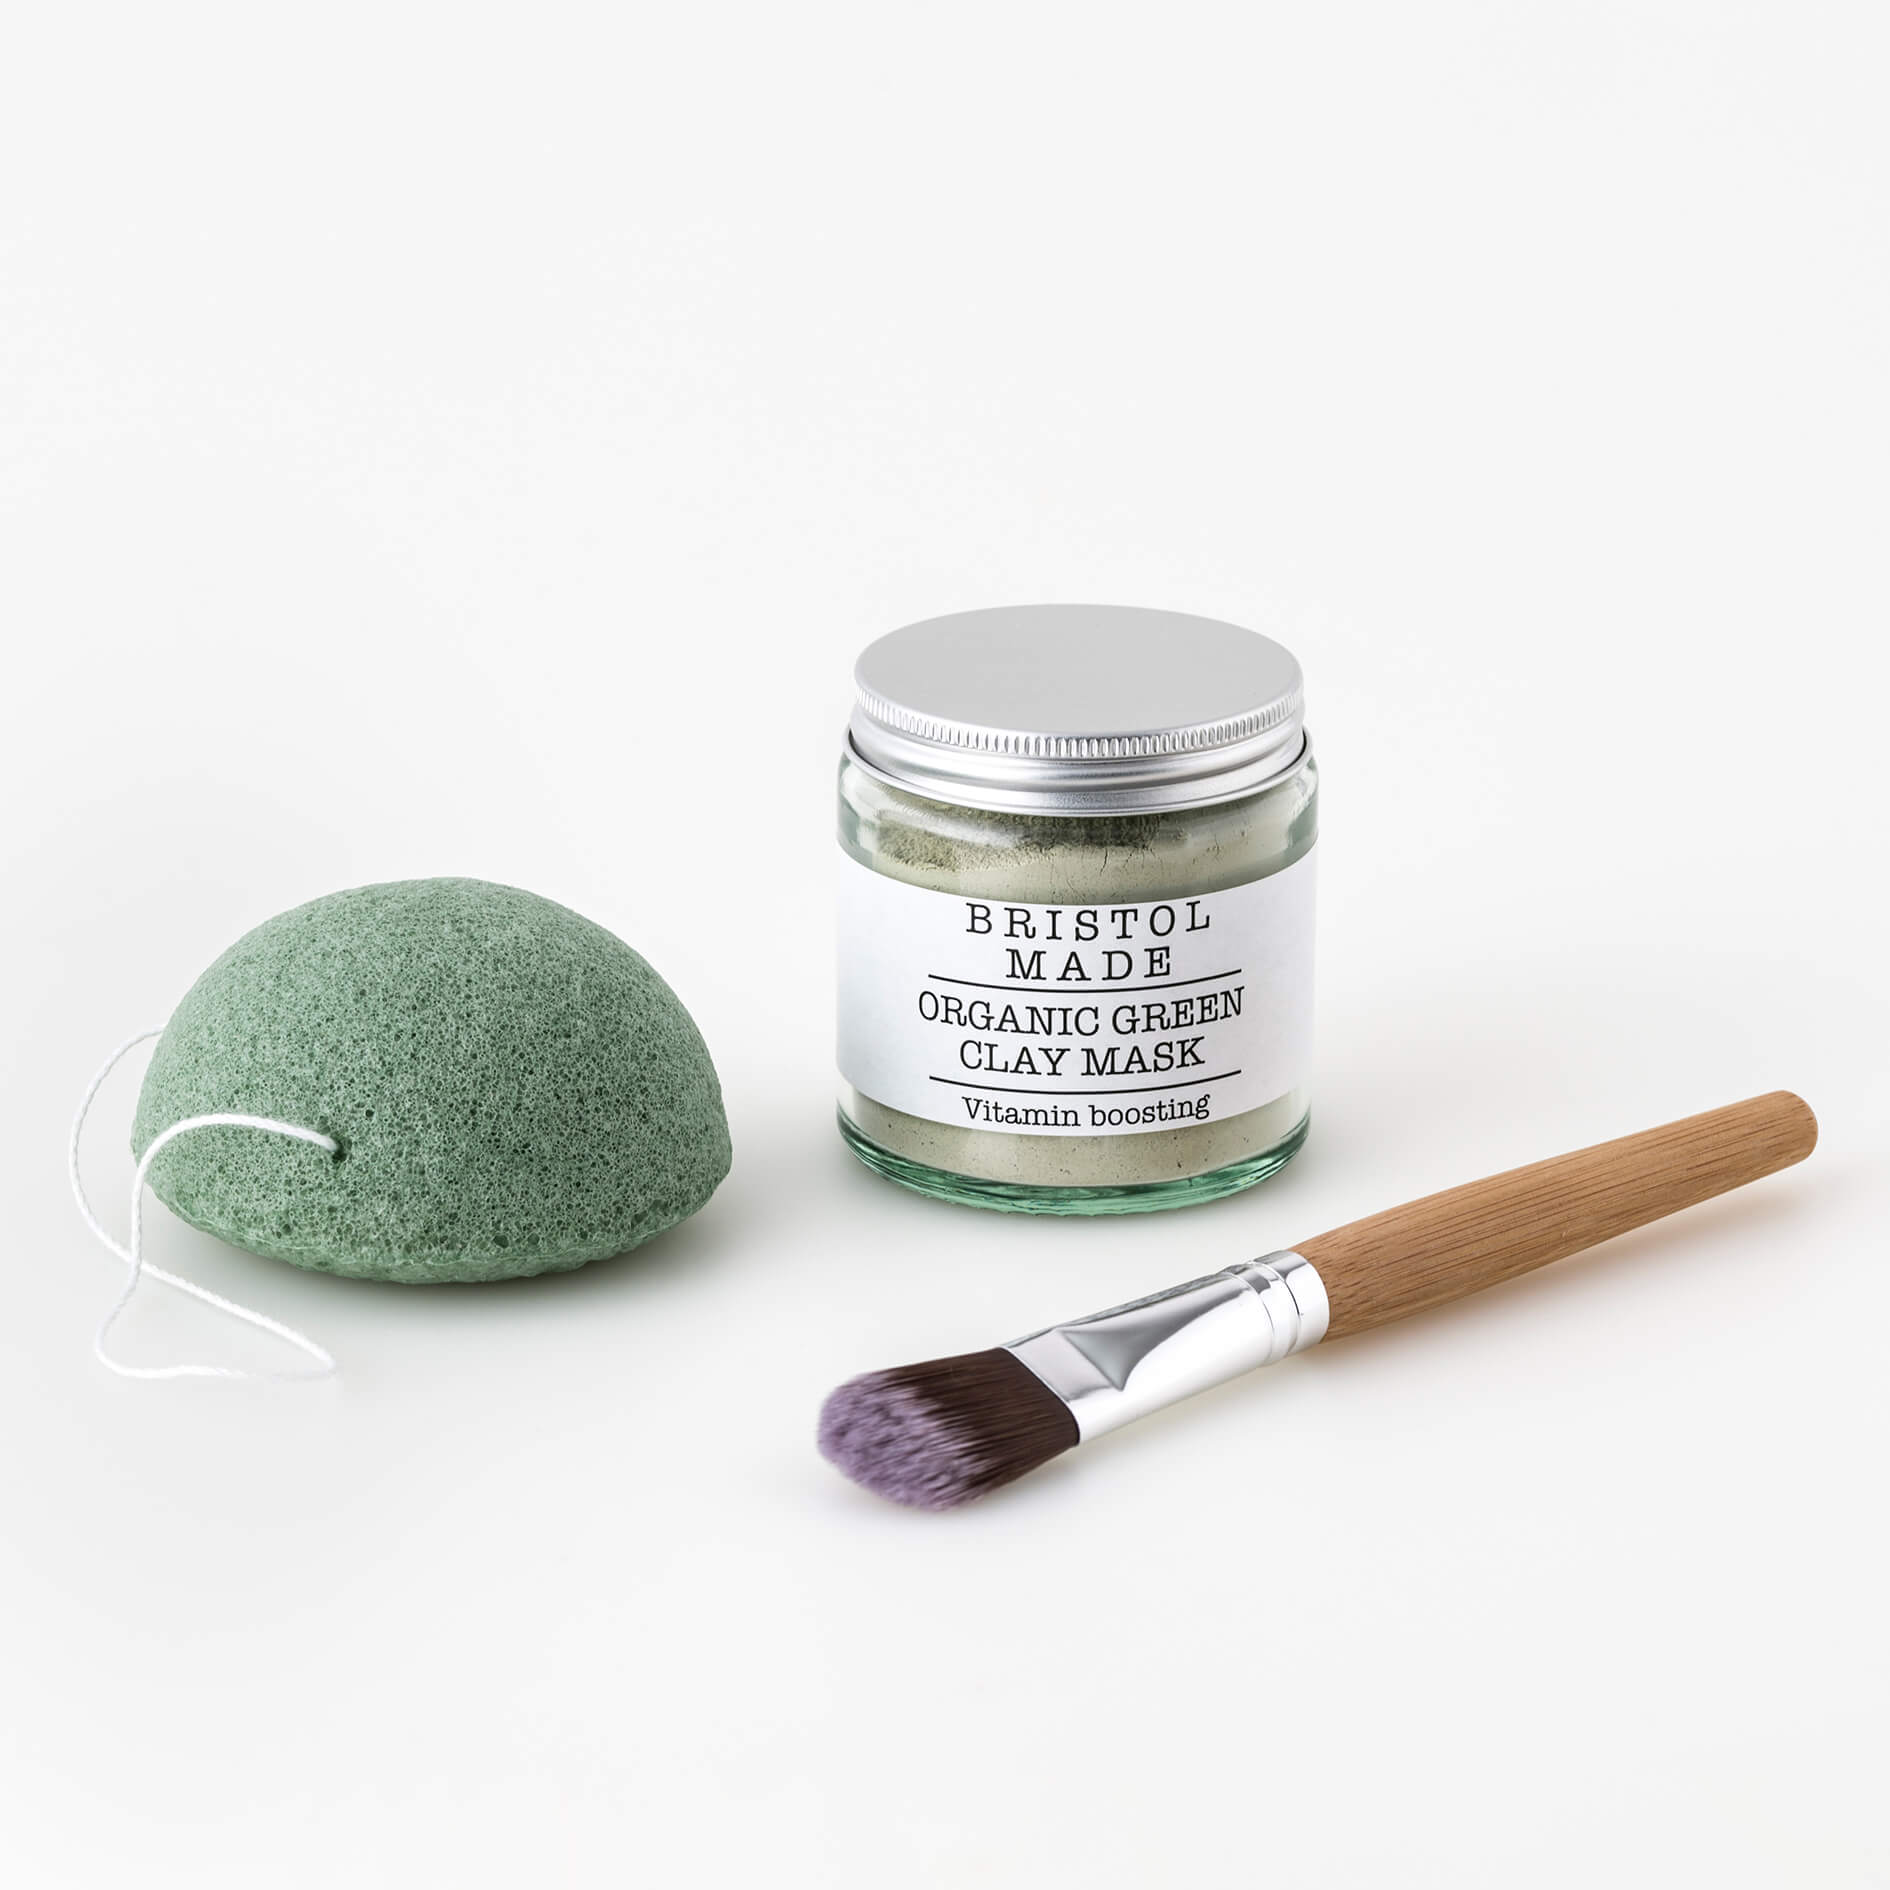 Bristolmade Clay Mask Kit, contains a pot of clay mask, a brush to easily appy the mask and a konjac sponge to gently remove and exfoliate the skin. 